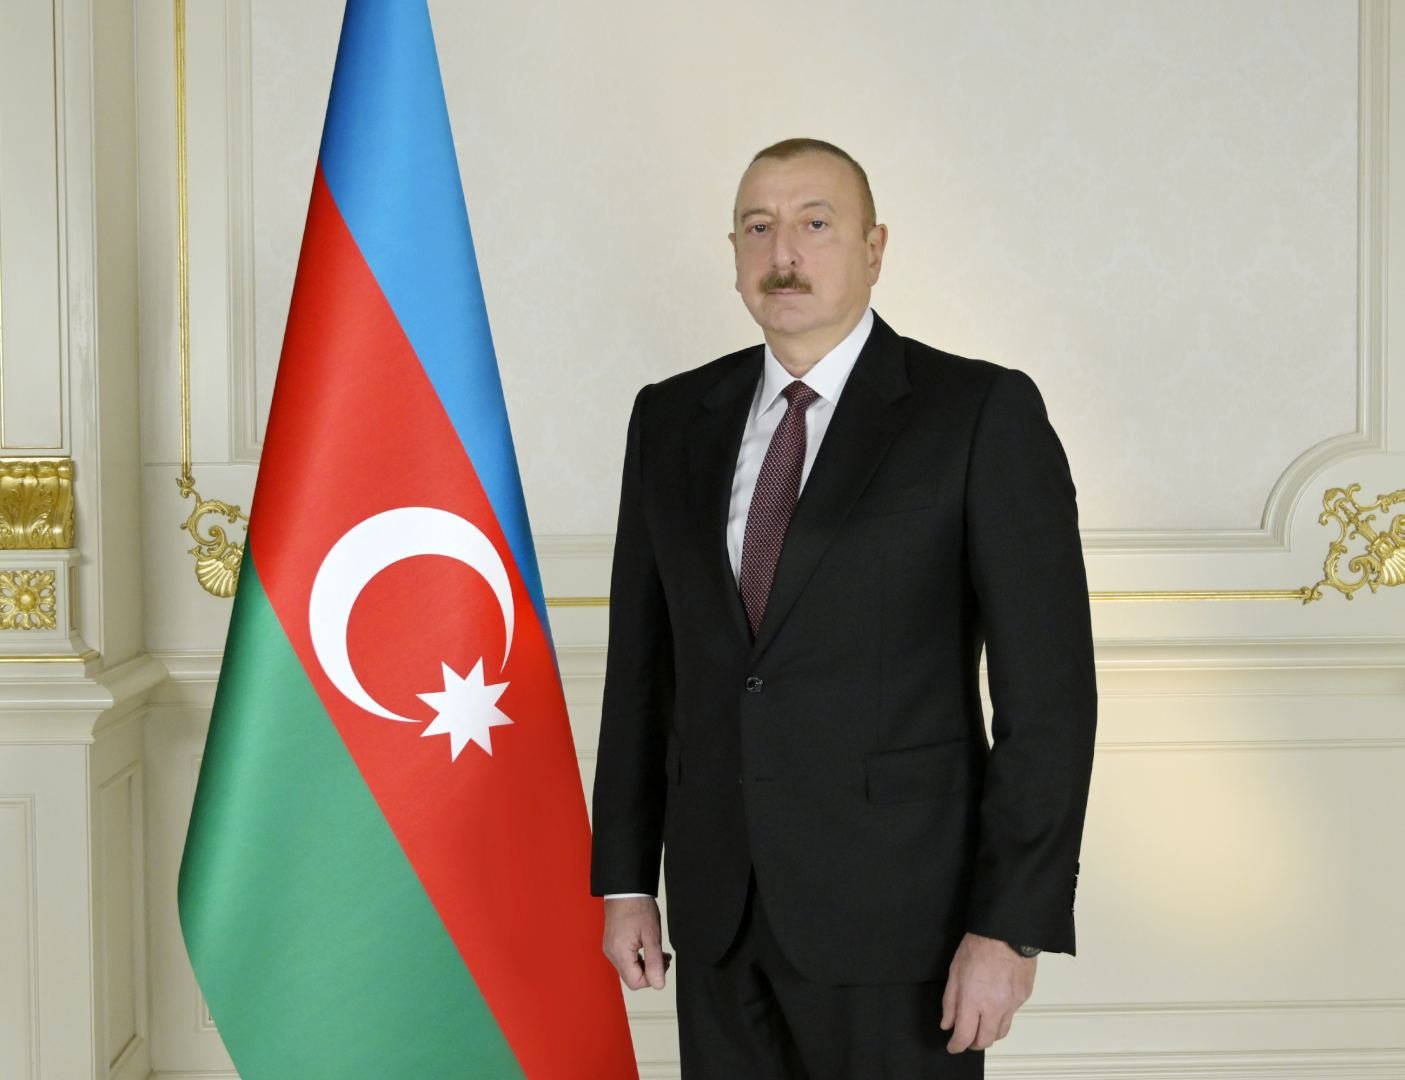 There are good opportunities to broaden and develop cooperation between Azerbaijan and Georgia - President Ilham Aliyev